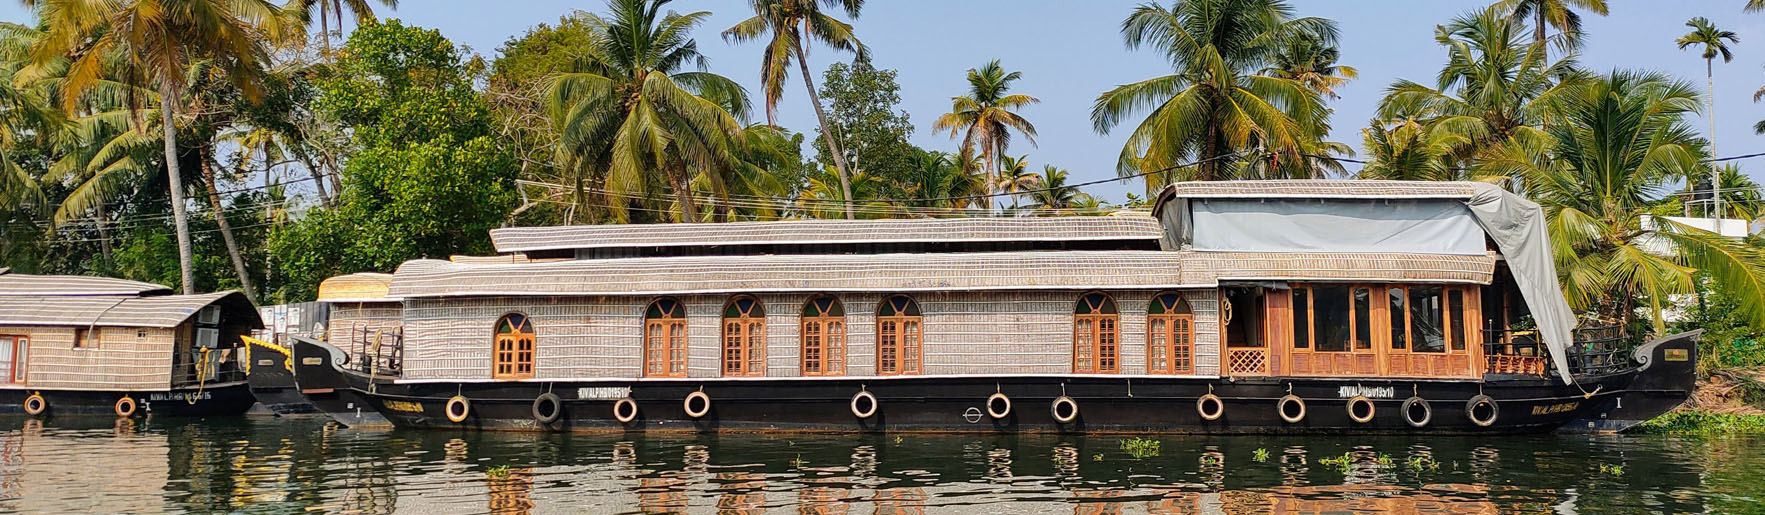 Alleppey - venice in the east - tourist destination in Kerala - southern india by car and driver